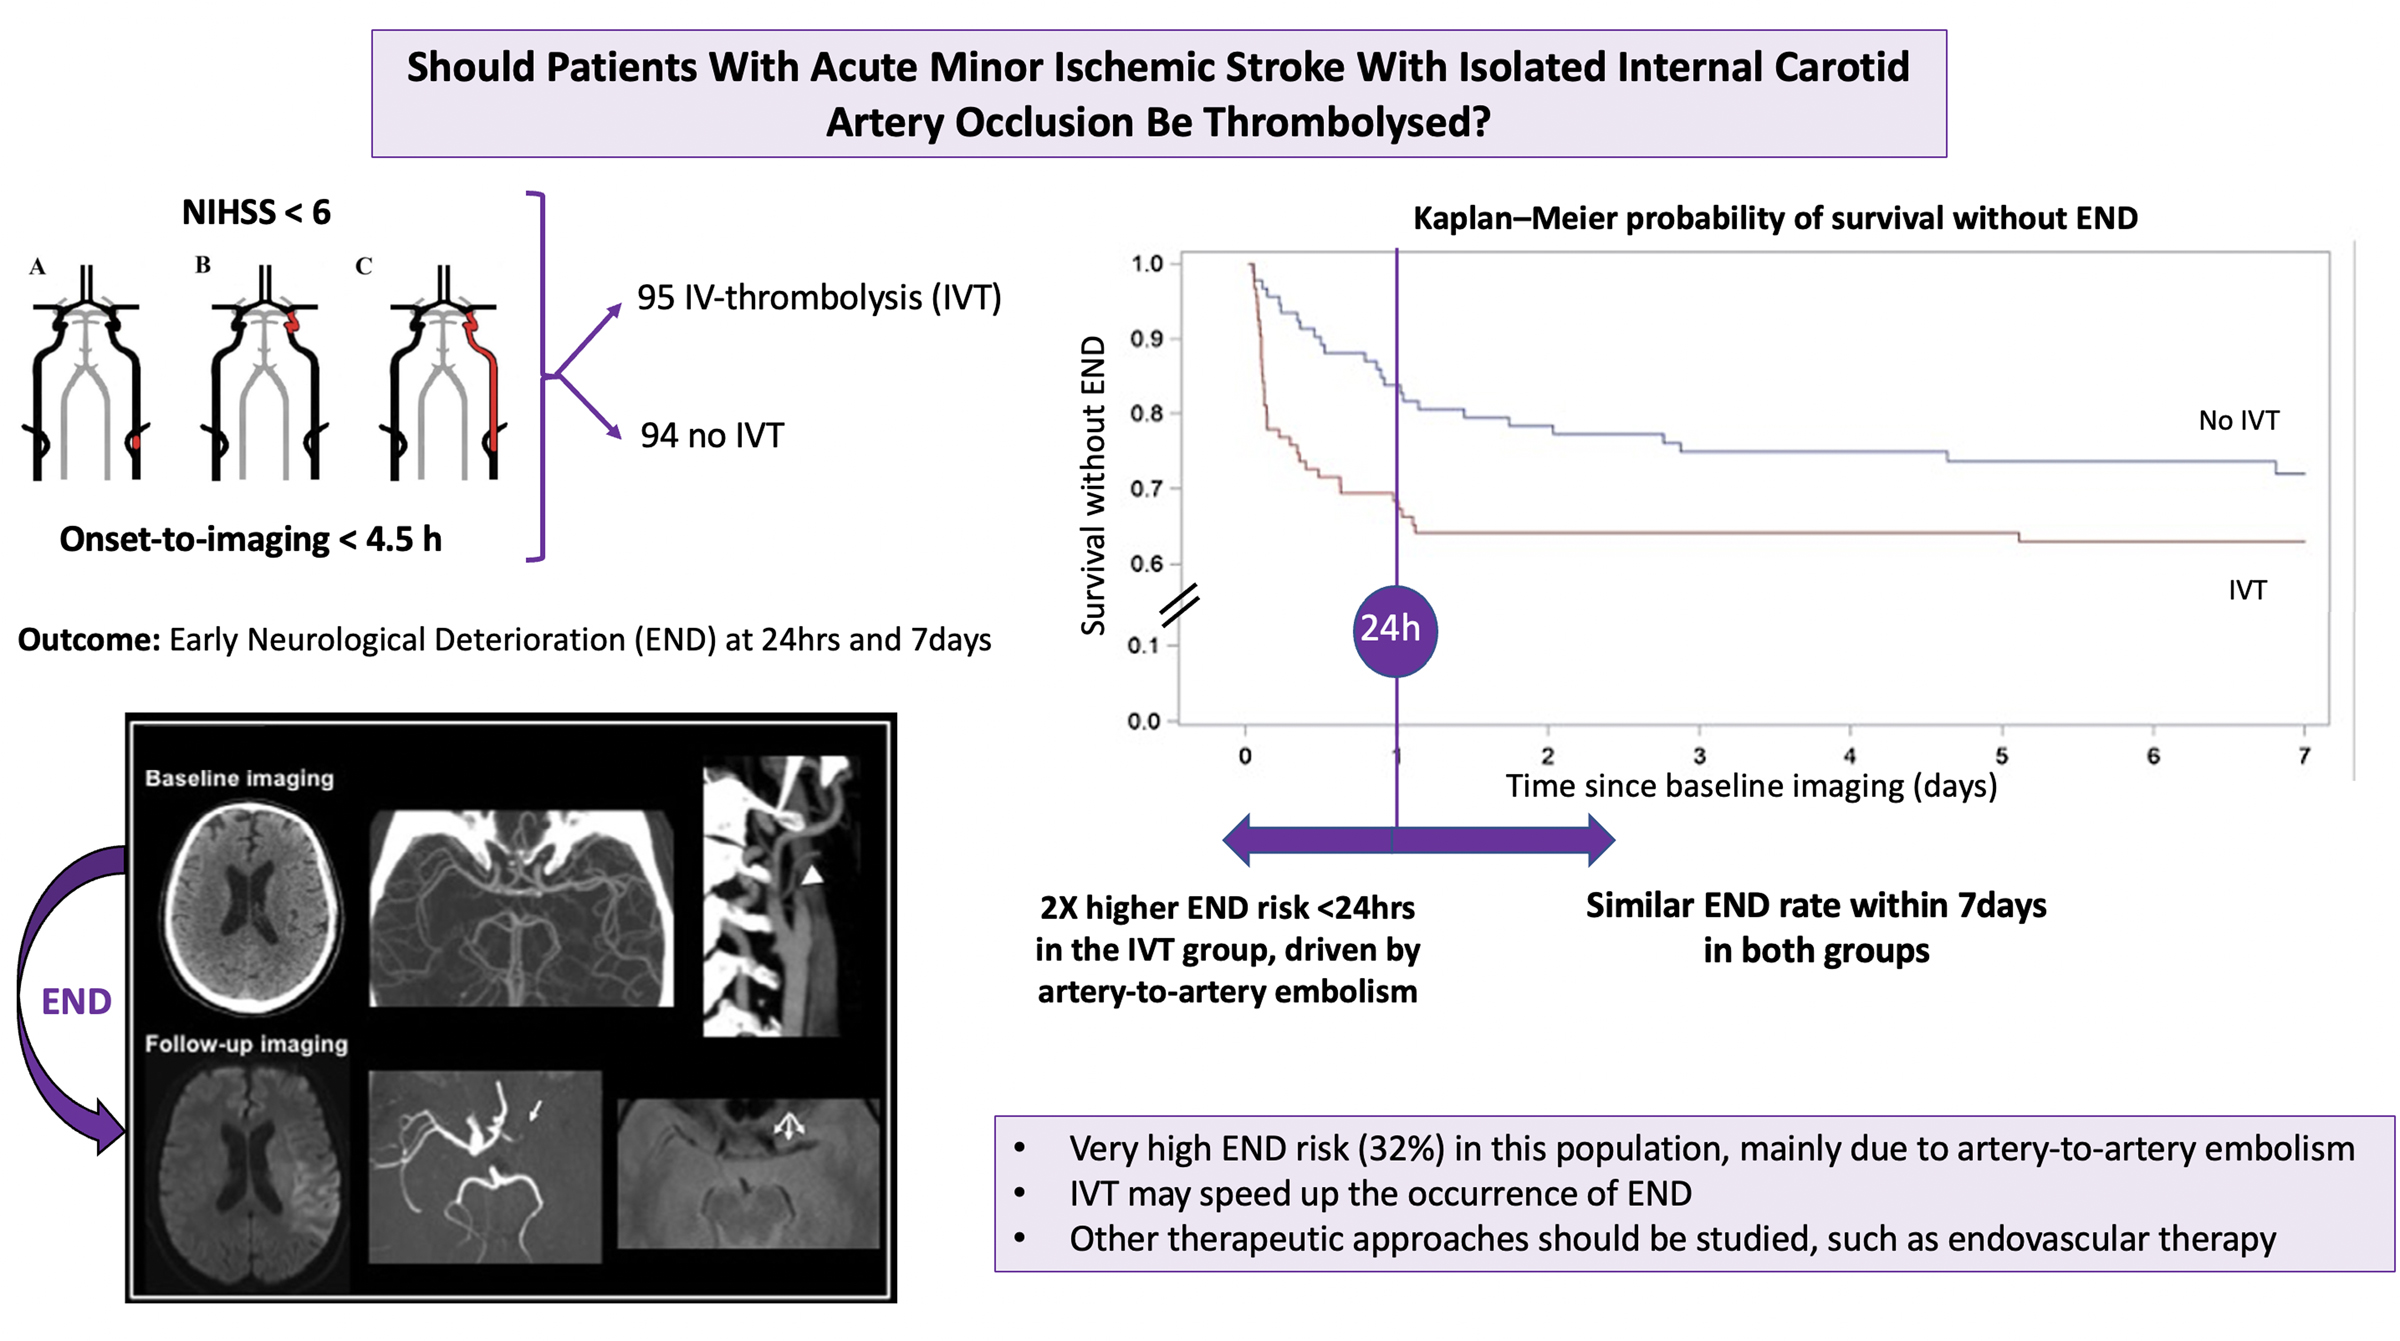 Should Patients With Acute Minor Ischemic Stroke With Isolated Internal Carotid Artery Occlusion Be Thrombolysed?